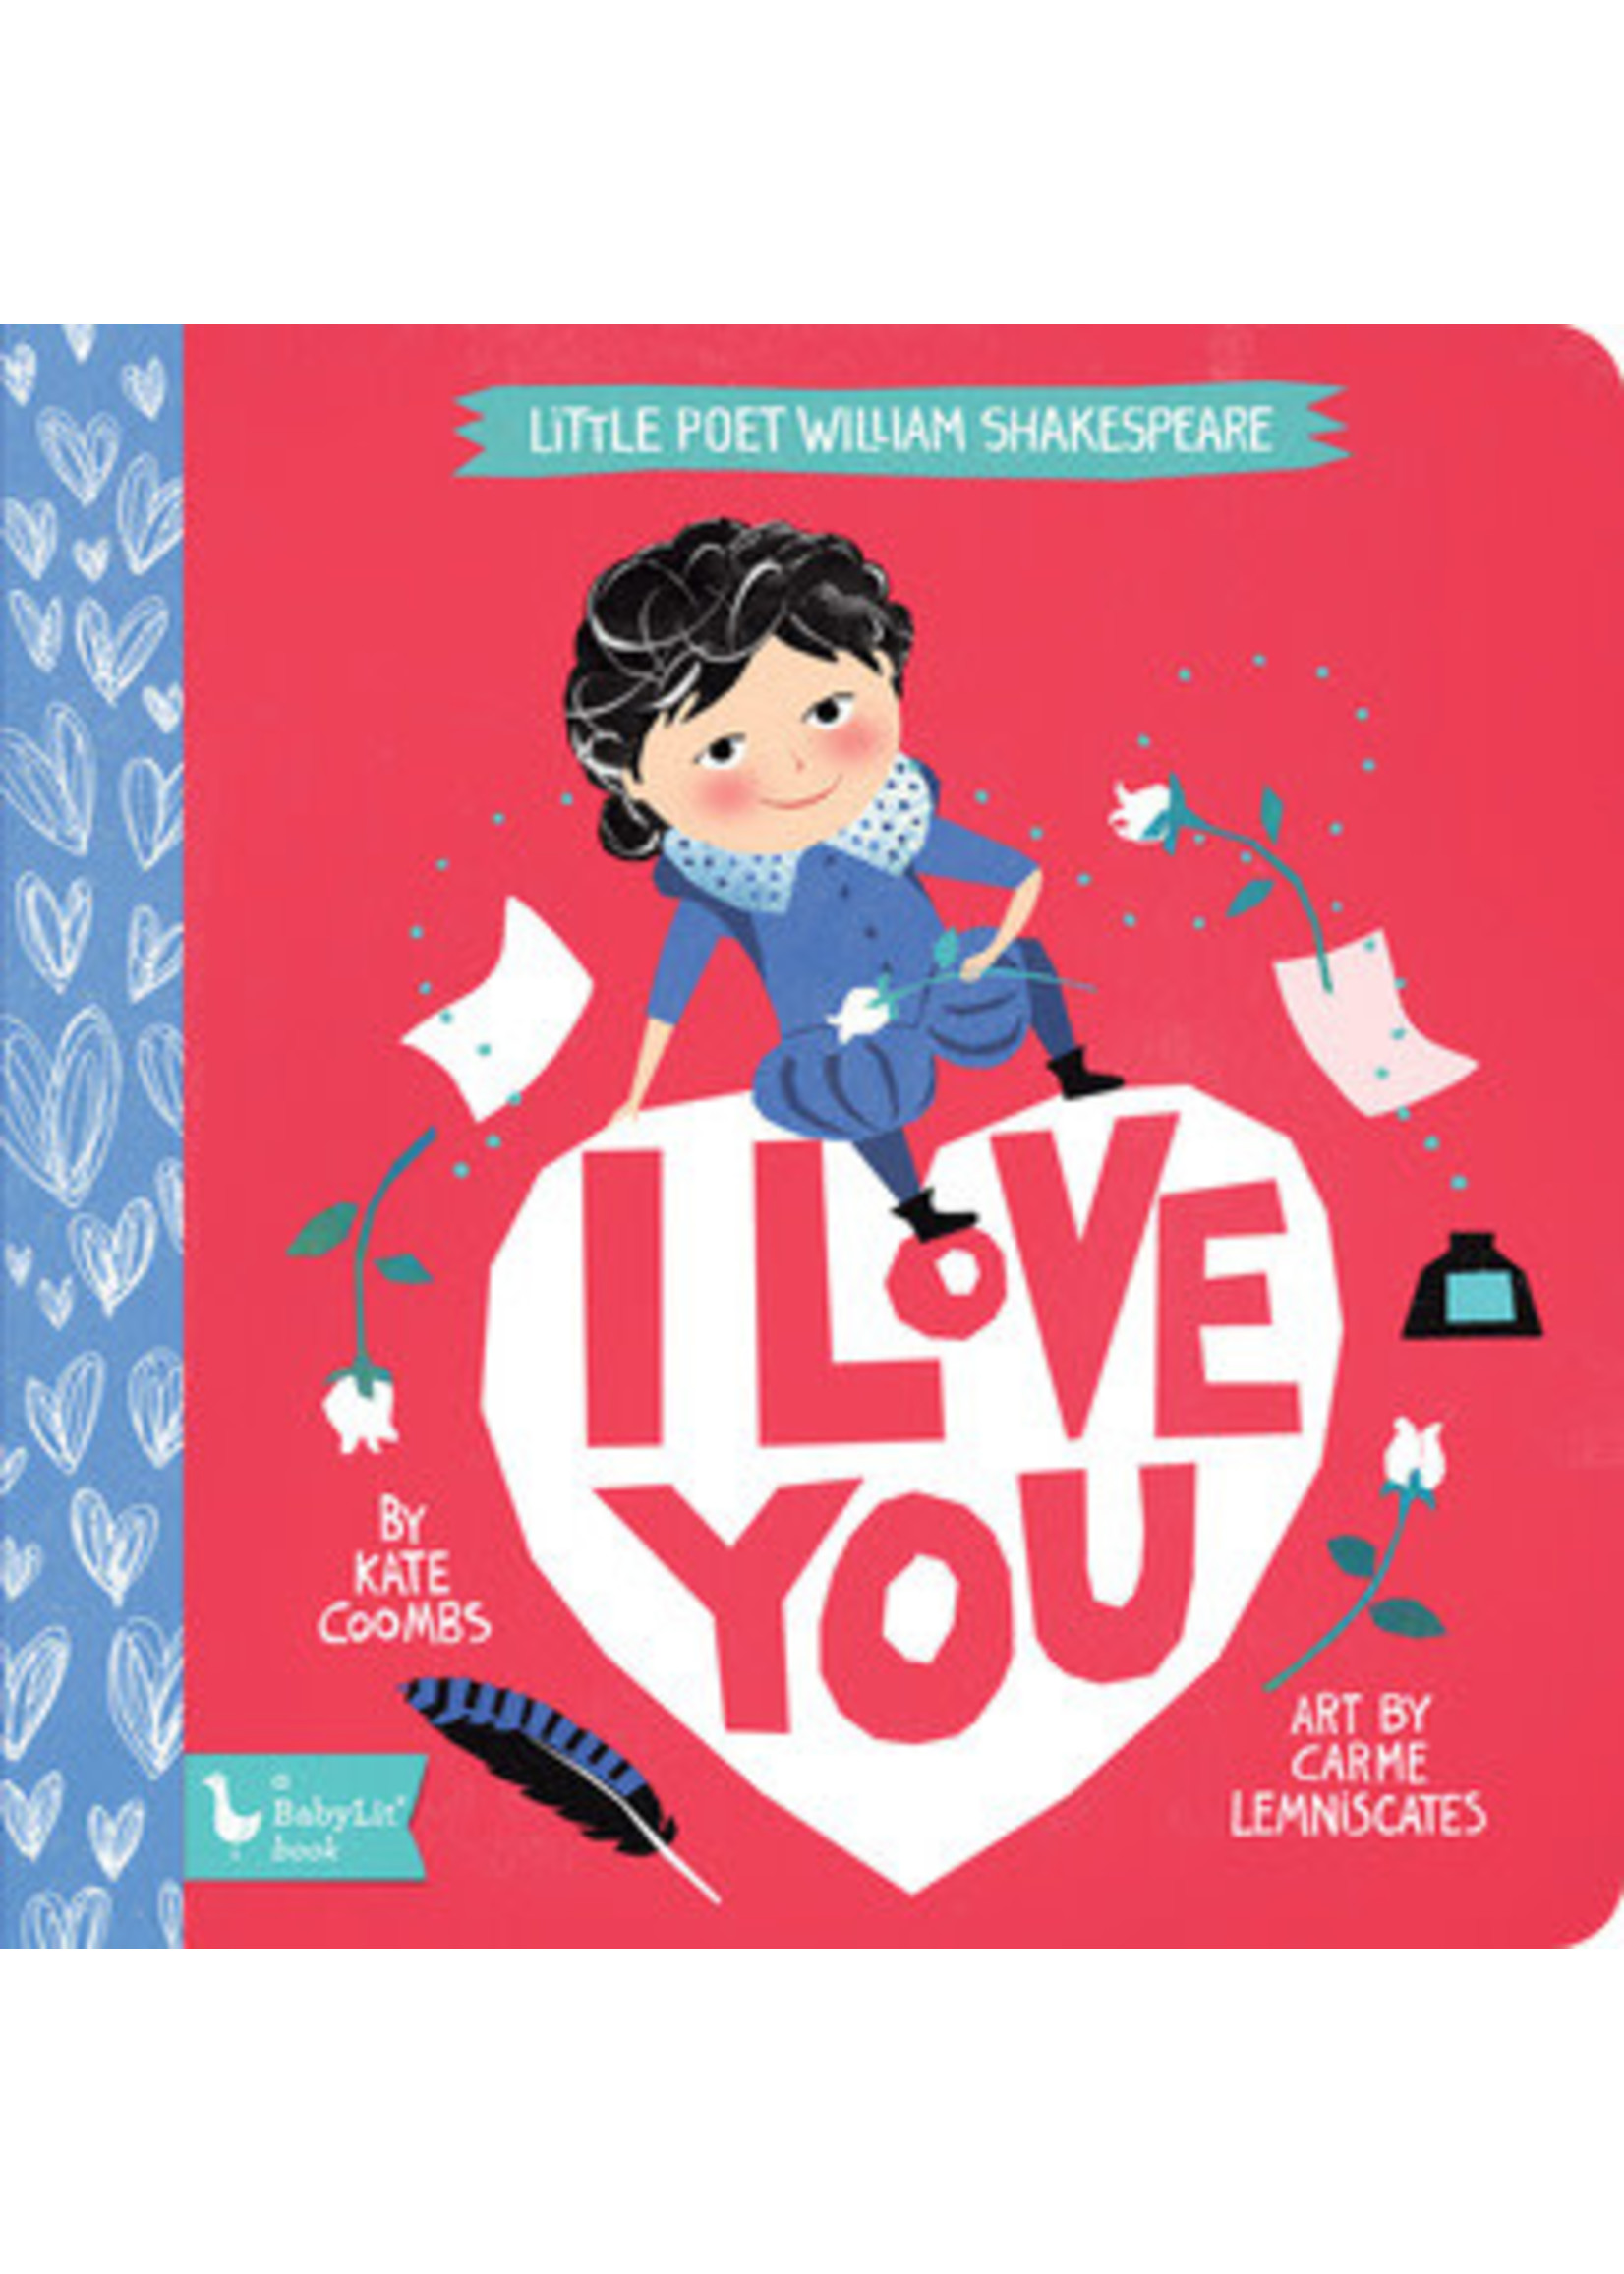 Little Poet William Shakespeare: I Love You by Kate Coombs, Carme Lemniscates